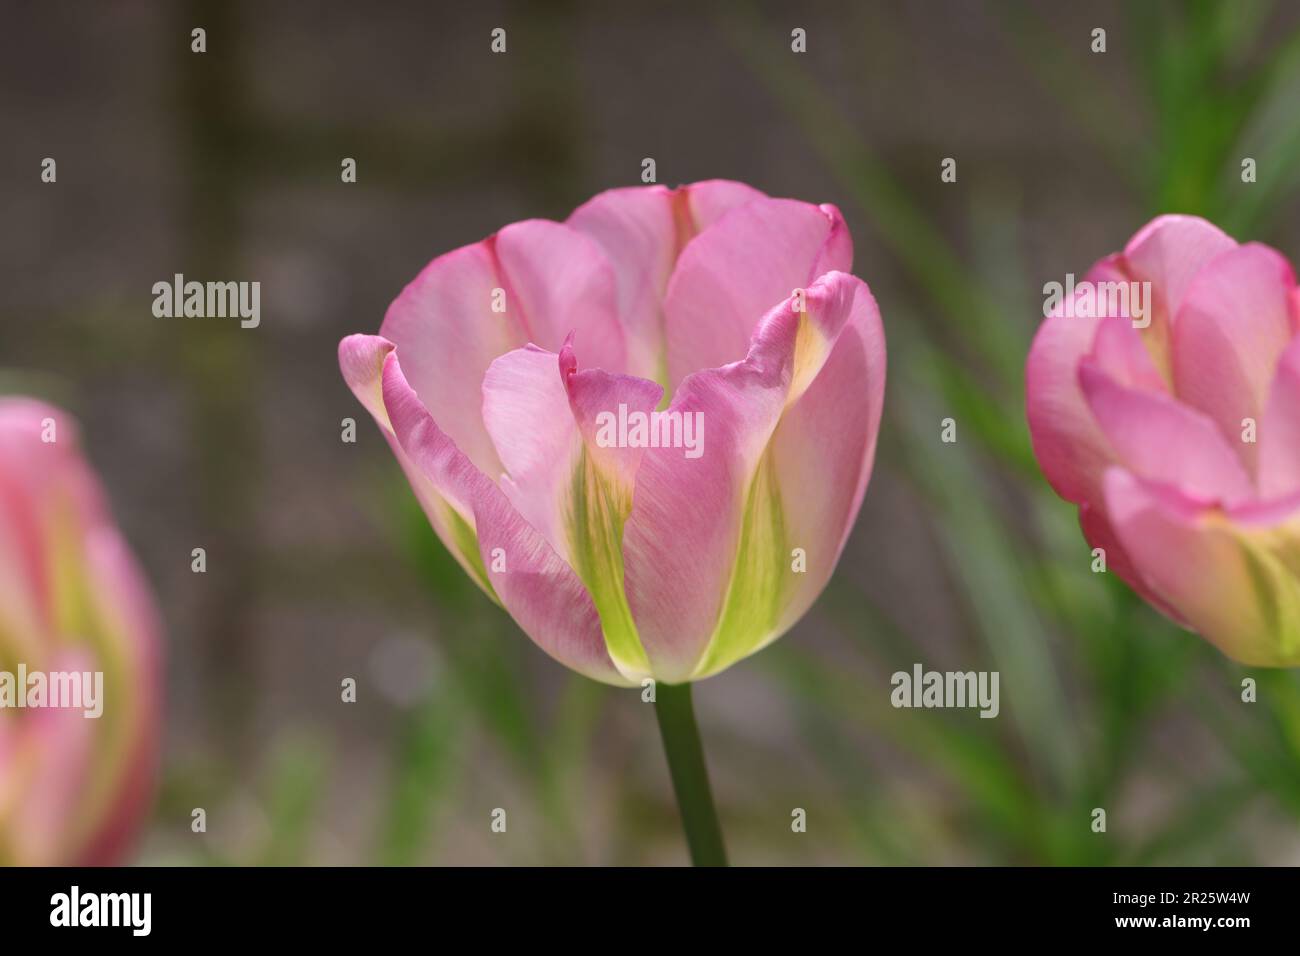 side view of a beautiful pink viridiflora tulip against a natural blurry background Stock Photo